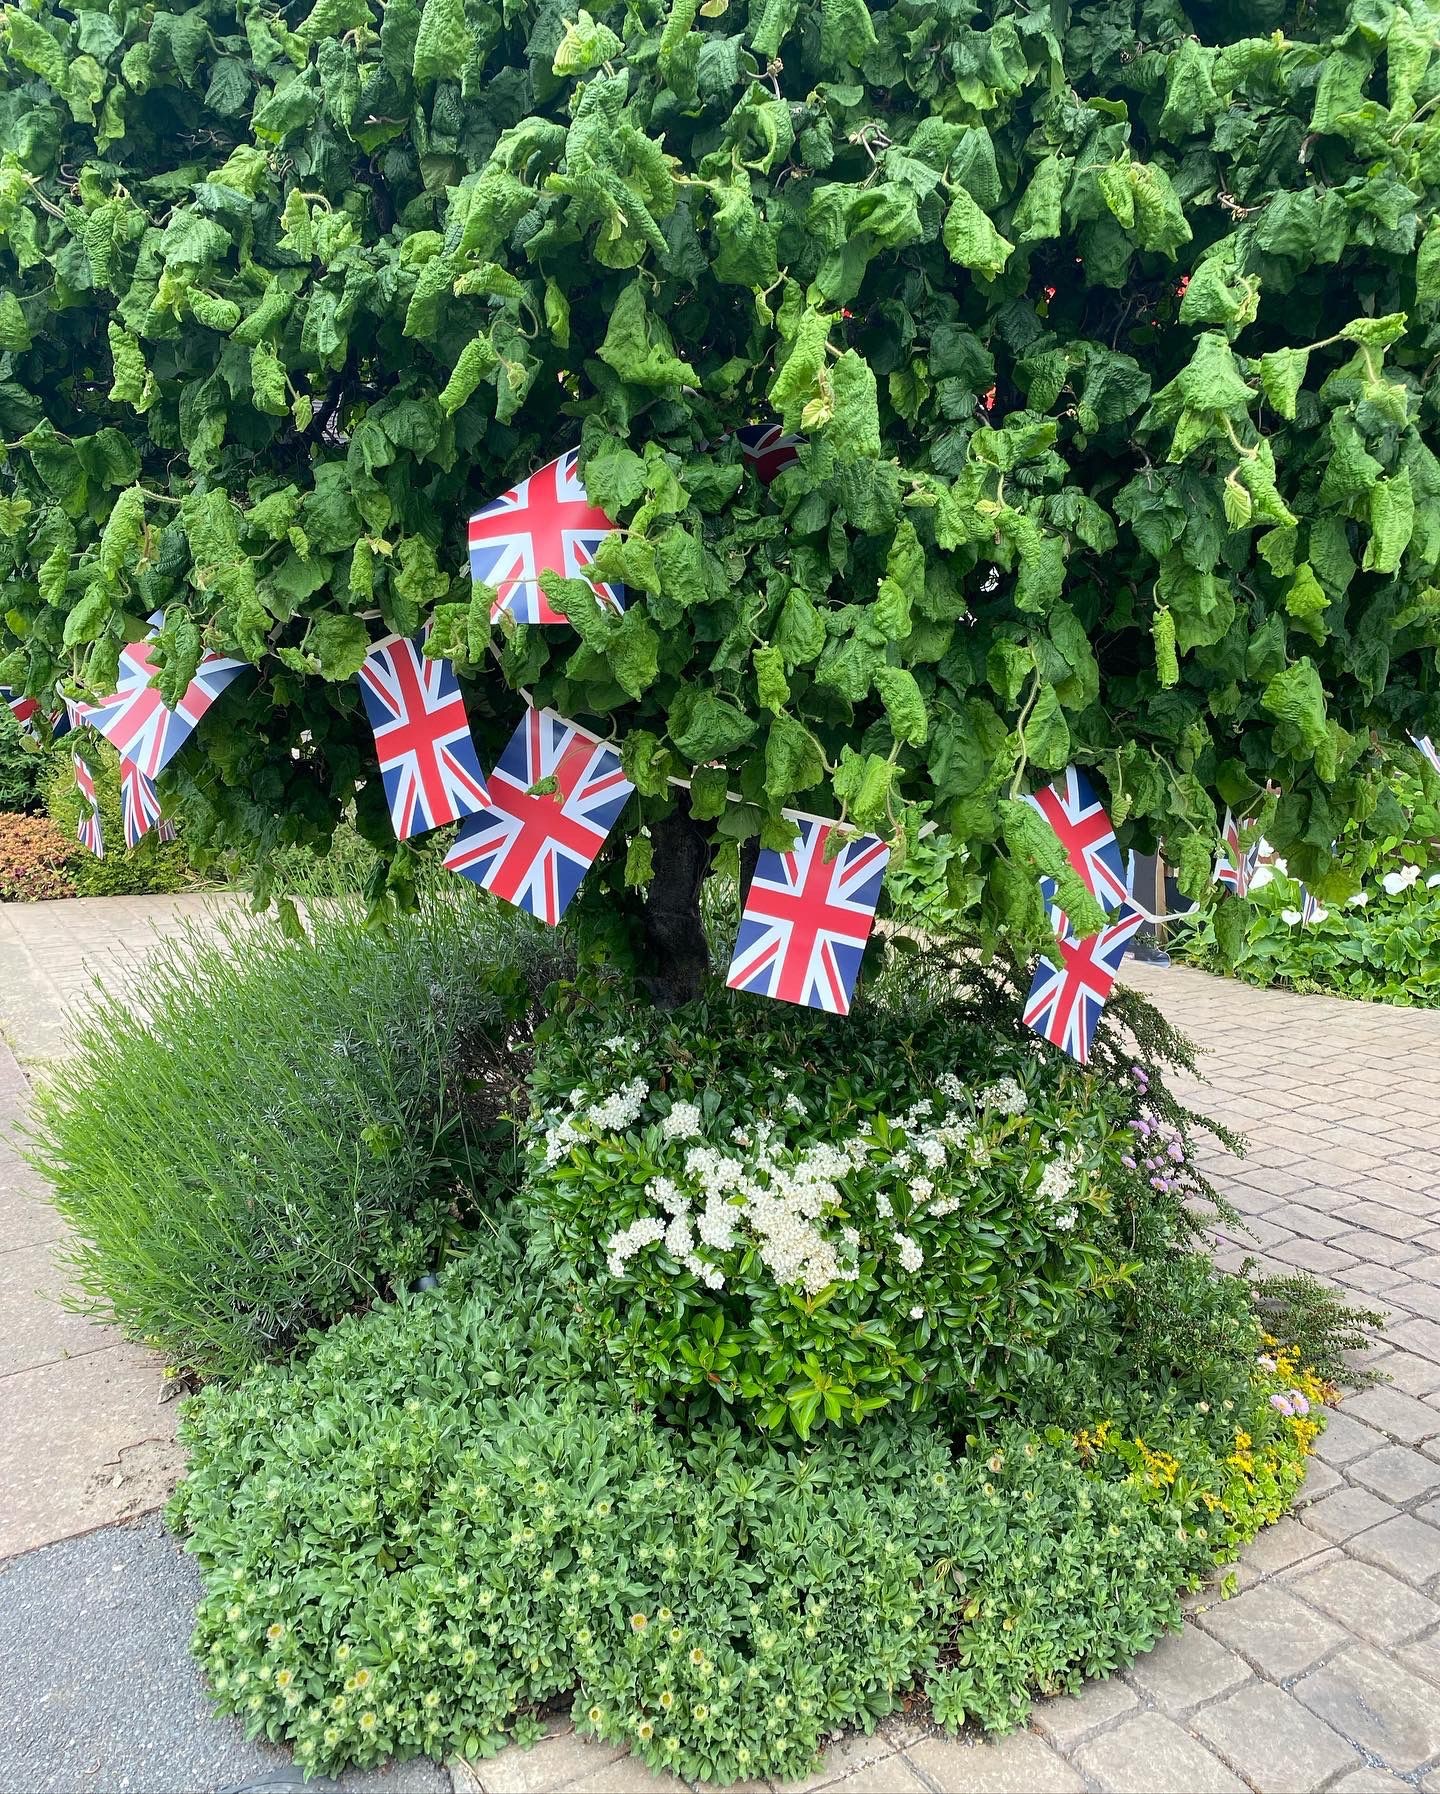 Platinum Jubilee decorations in Bromley, south London (Athina Georgiou)